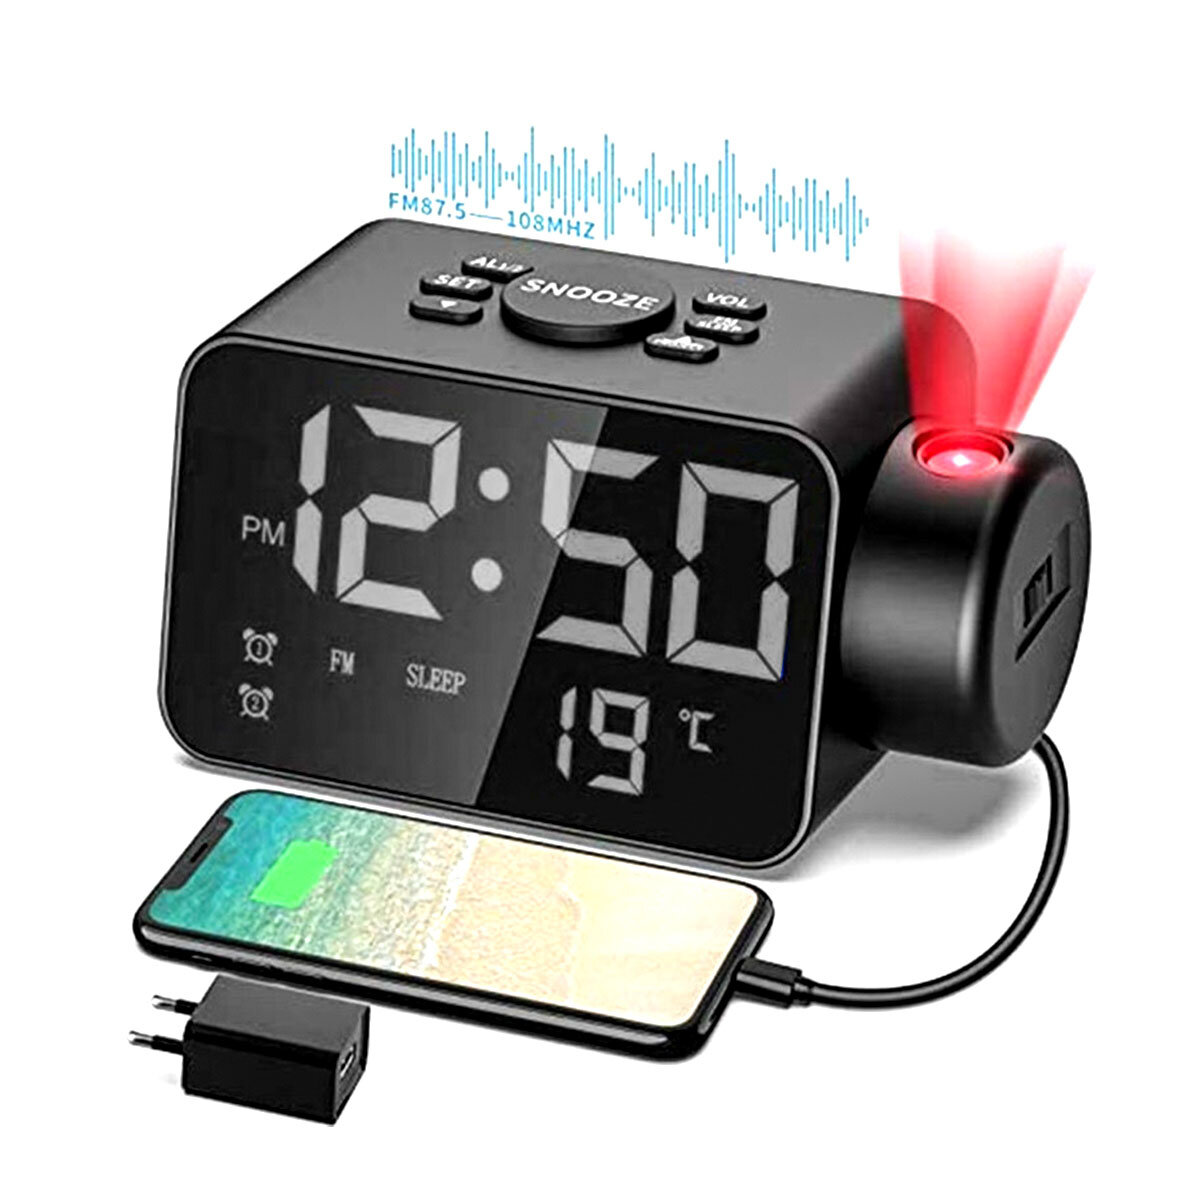 

LED Projection Alarm Clock USB Rechargeable FM Radio Snooze Mode Electronic Alarm Clock Time Temperature Display Clock